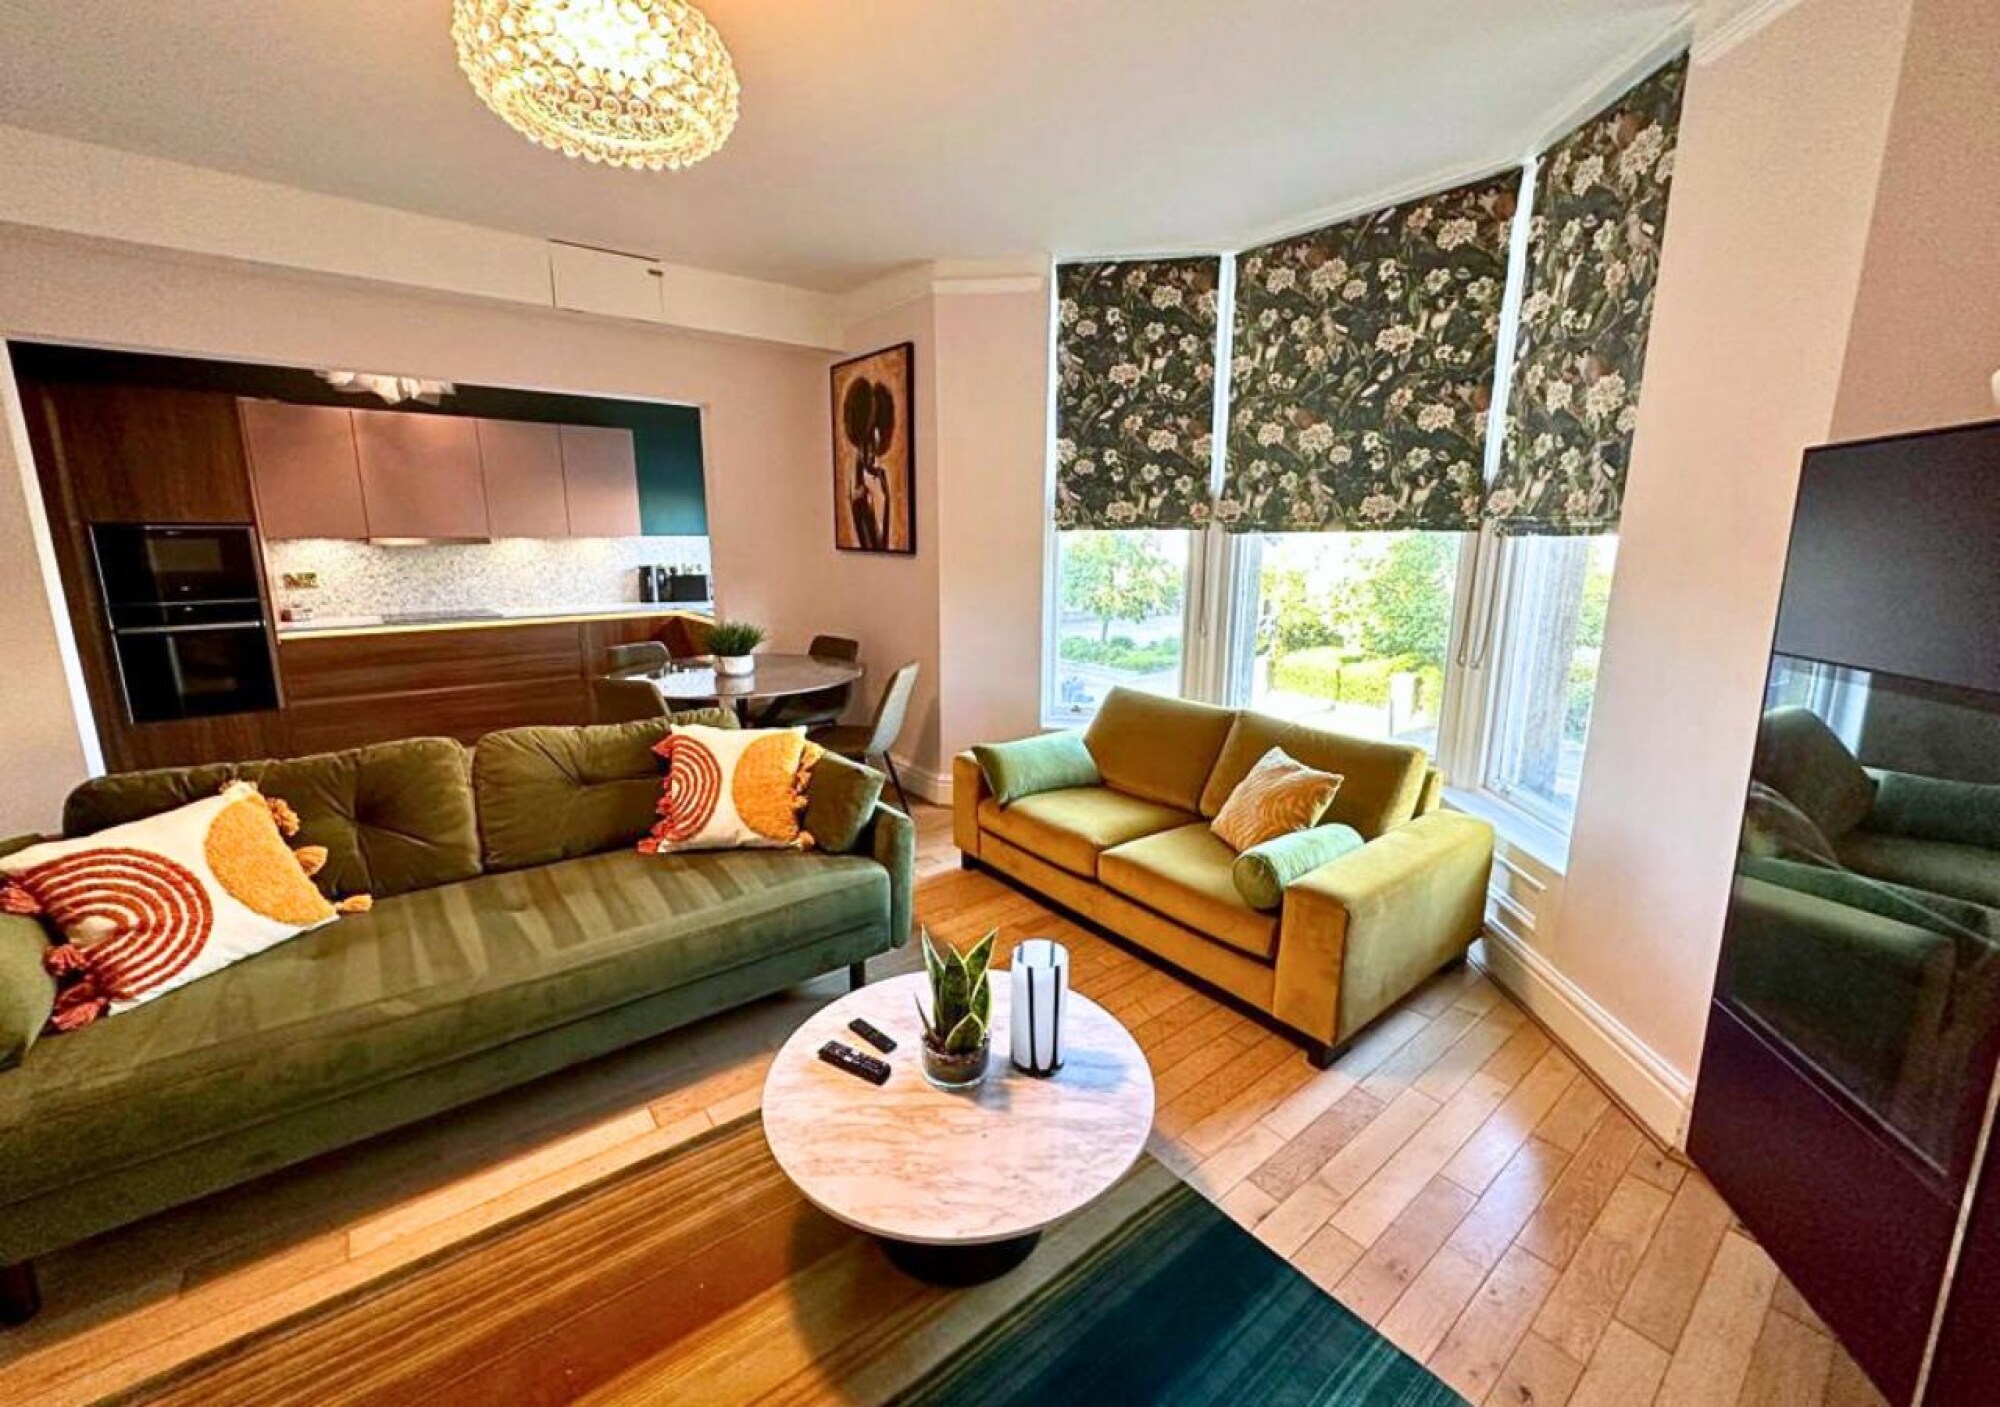 Property Image 1 - Contemporary Stylish 2 Bedroom Apartment - Central Harrogate